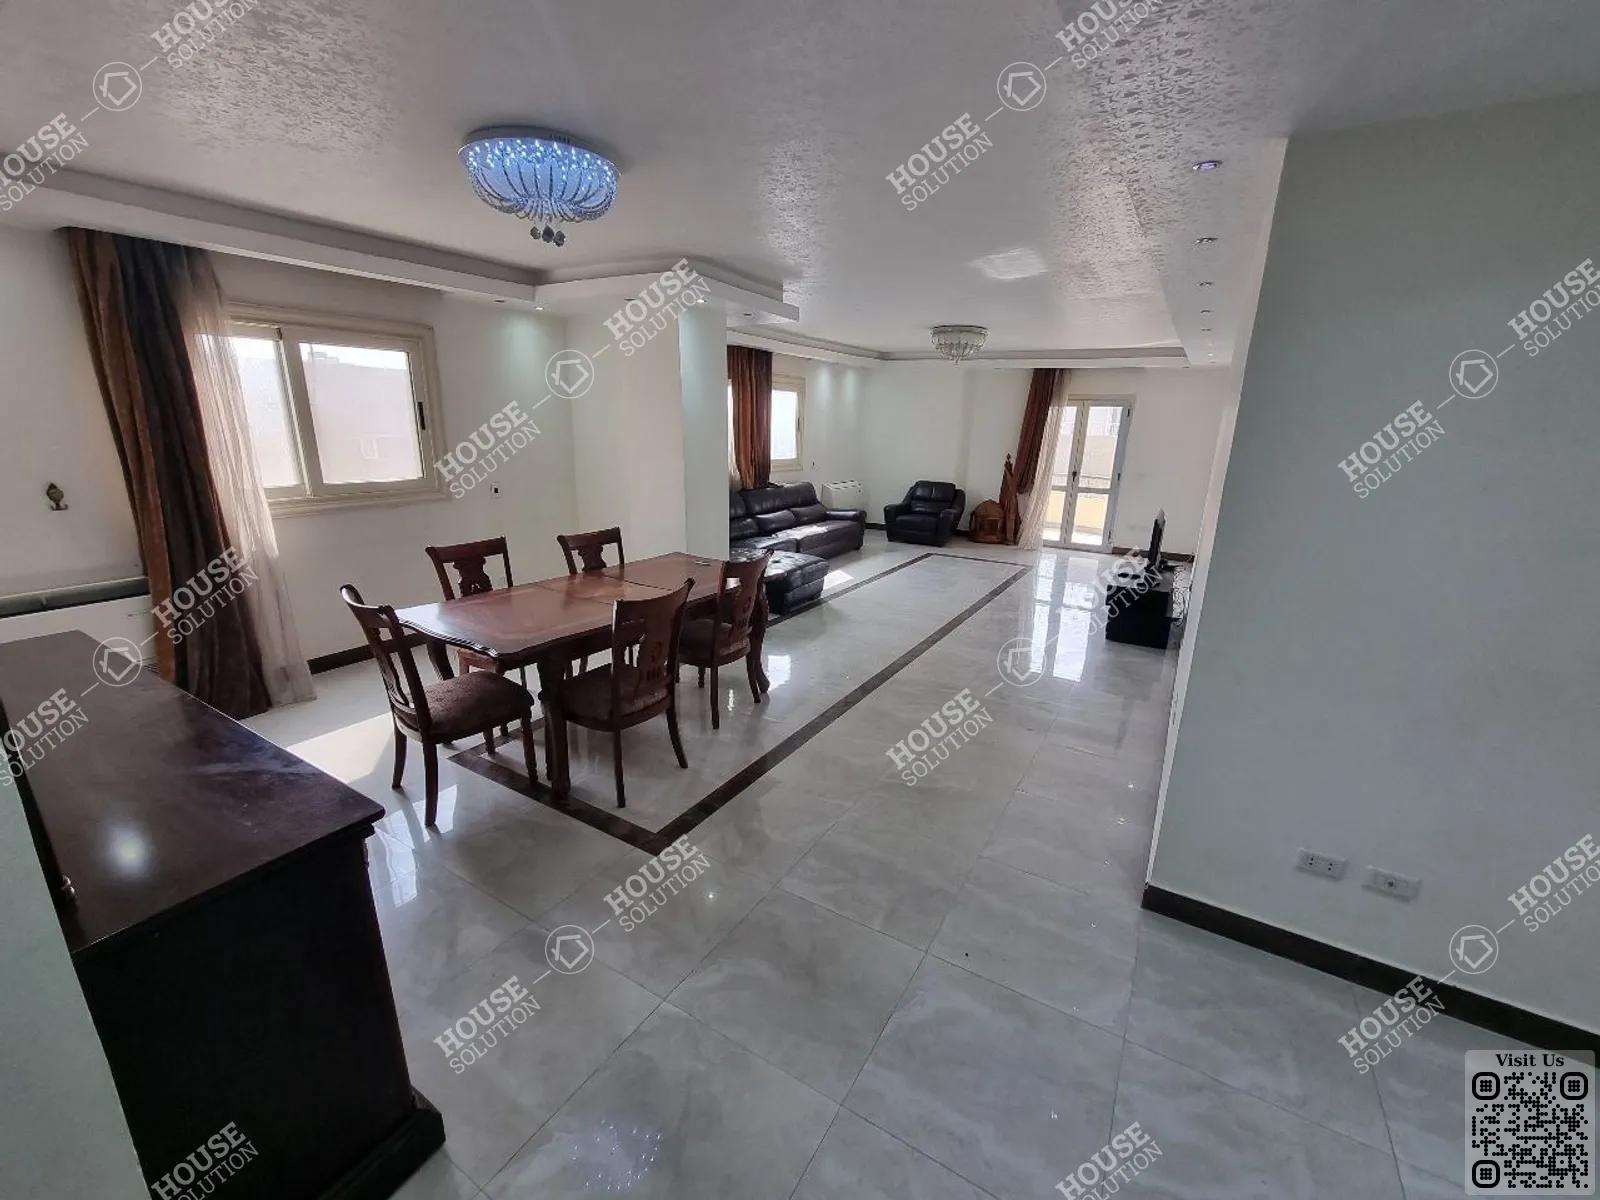 RECEPTION  @ Apartments For Rent In Maadi Maadi Sarayat Area: 220 m² consists of 3 Bedrooms 3 Bathrooms Modern furnished 5 stars #4539-2